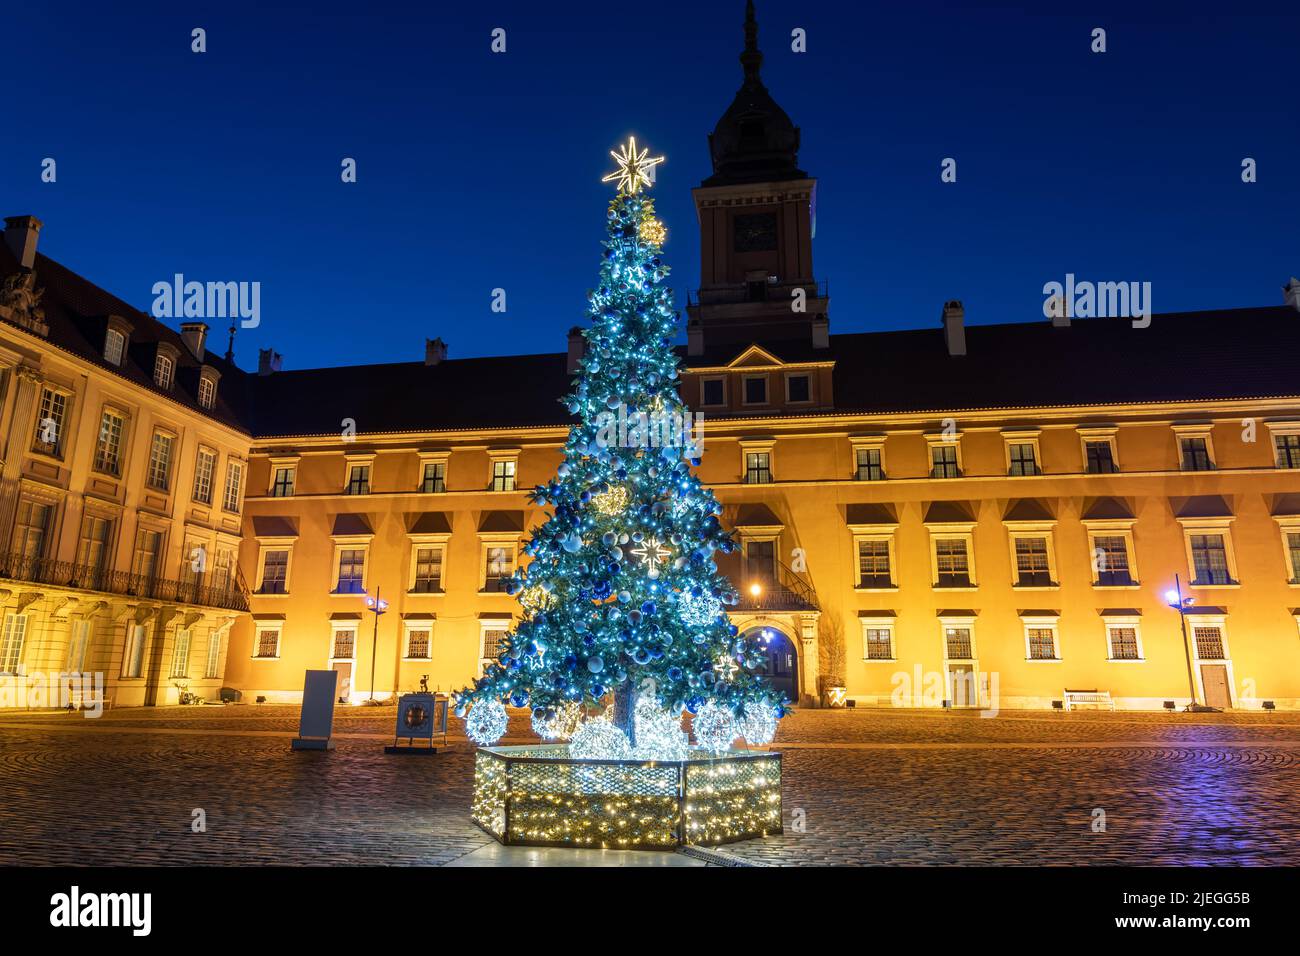 Warsaw, Poland - January 10, 2022: Courtyard of the Royal Castle with Christmas tree illuminated at night, Mannerist and Baroque architecture, city la Stock Photo